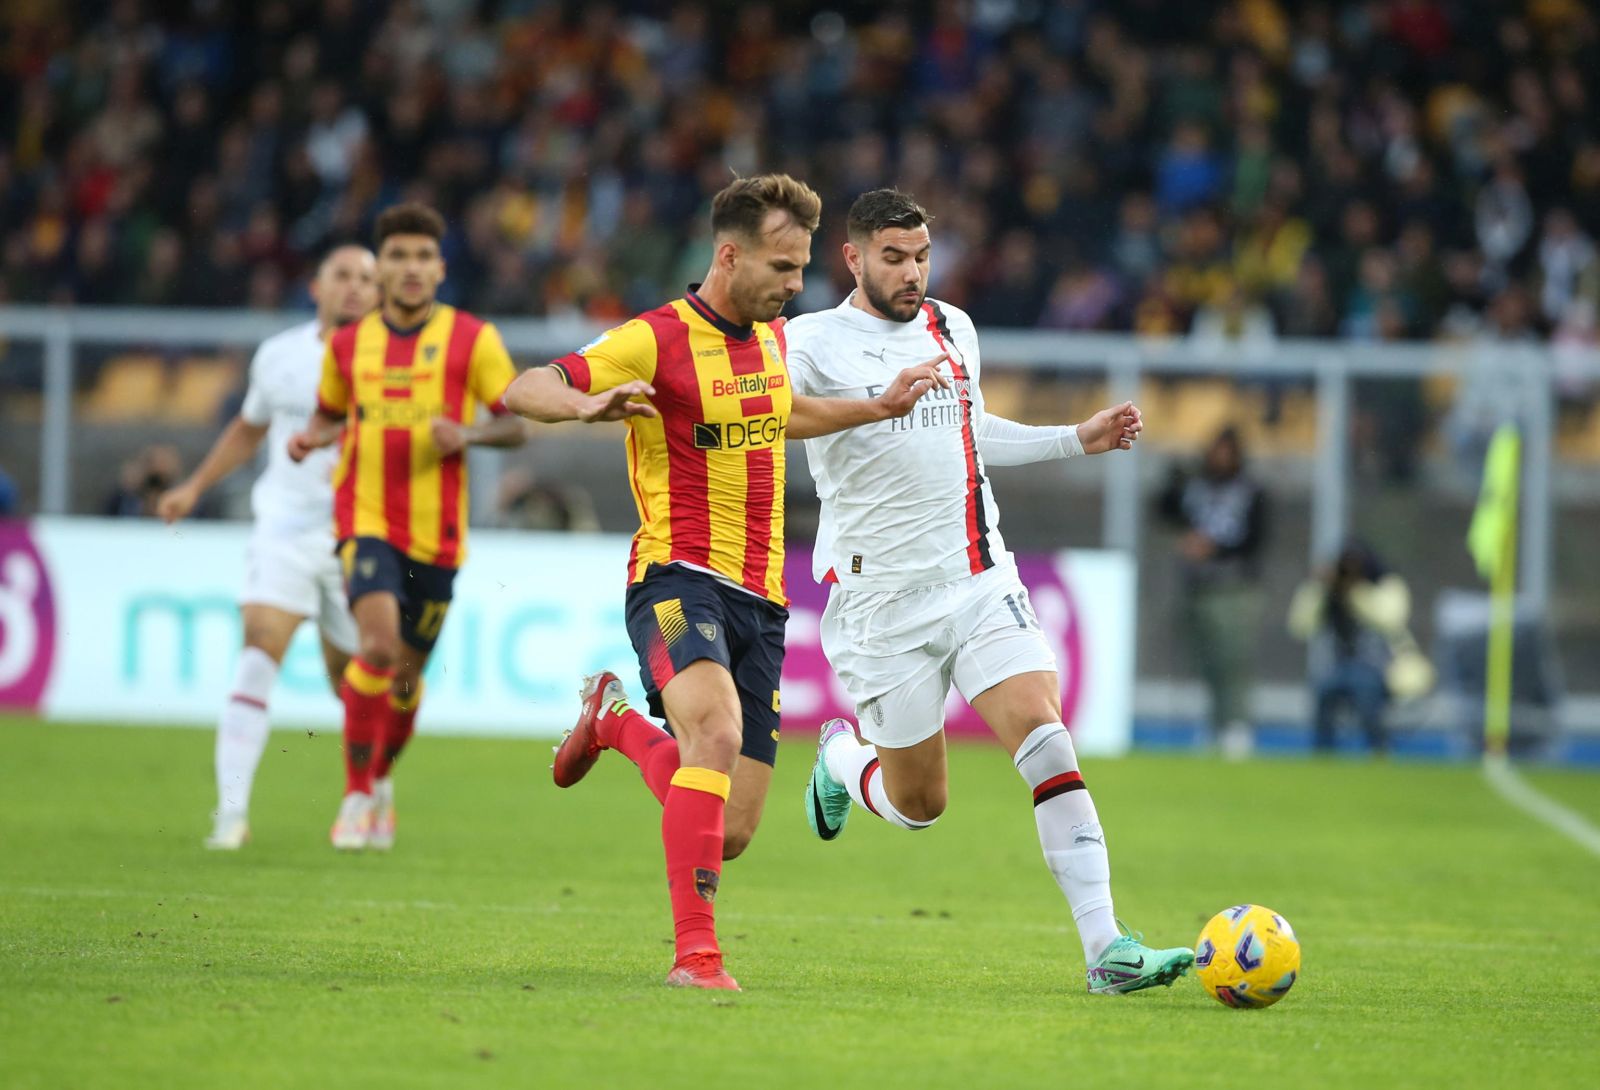 epa10970079 Lecce's Marin Pongracic (L) and Milan's Theo Hernandez (R) in action during the Italian Serie A soccer match between US Lecce and AC Milan in Lecce, Italy, 11 November 2023.  EPA/ABBONDANZA SCURO LEZZI